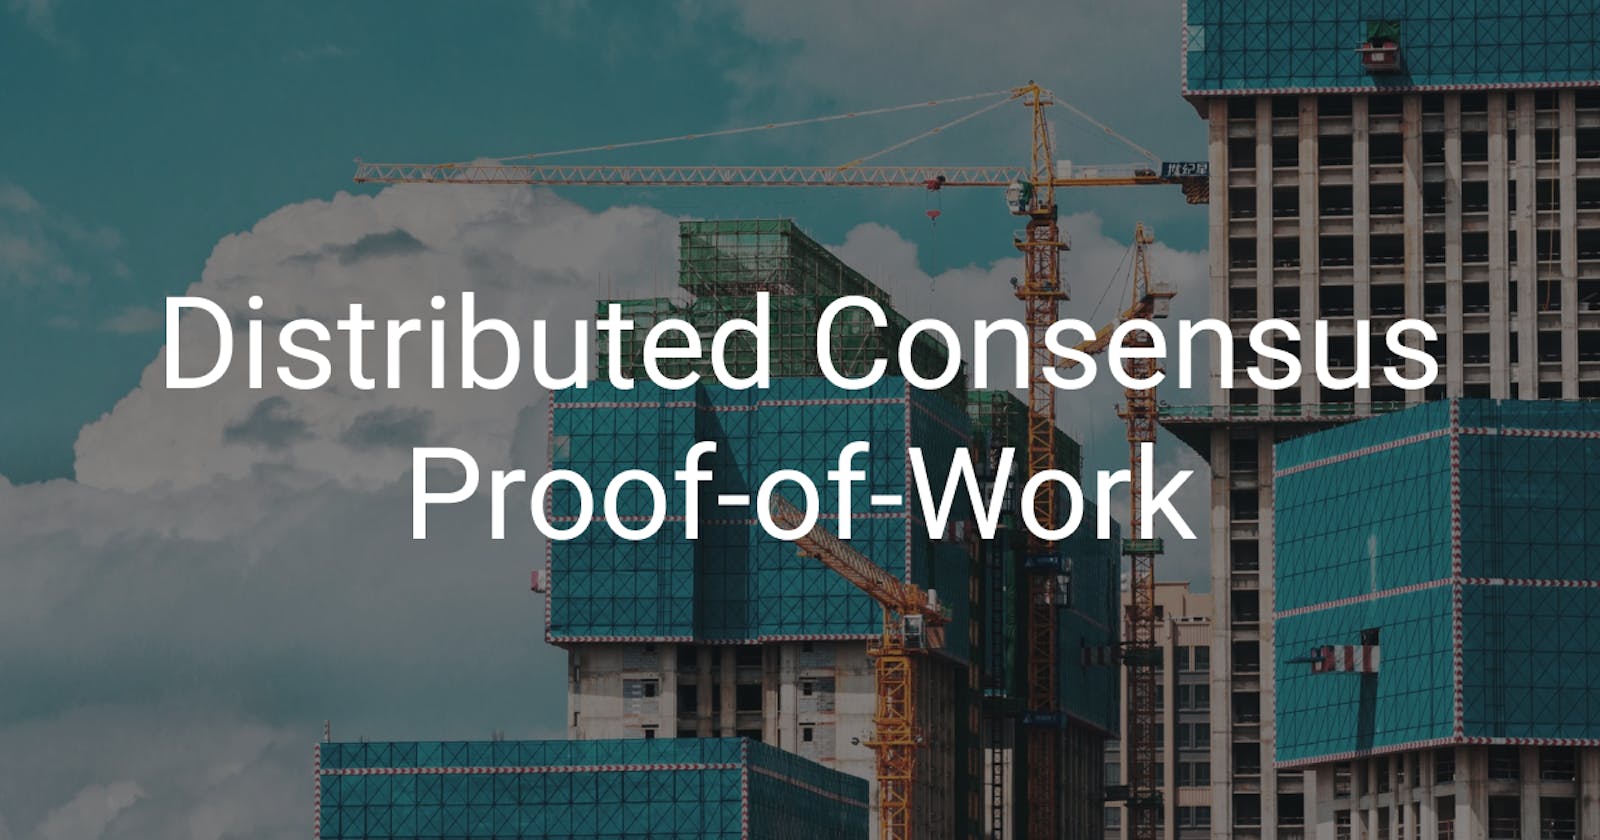 Distributed Consensus - Proof-of-Work